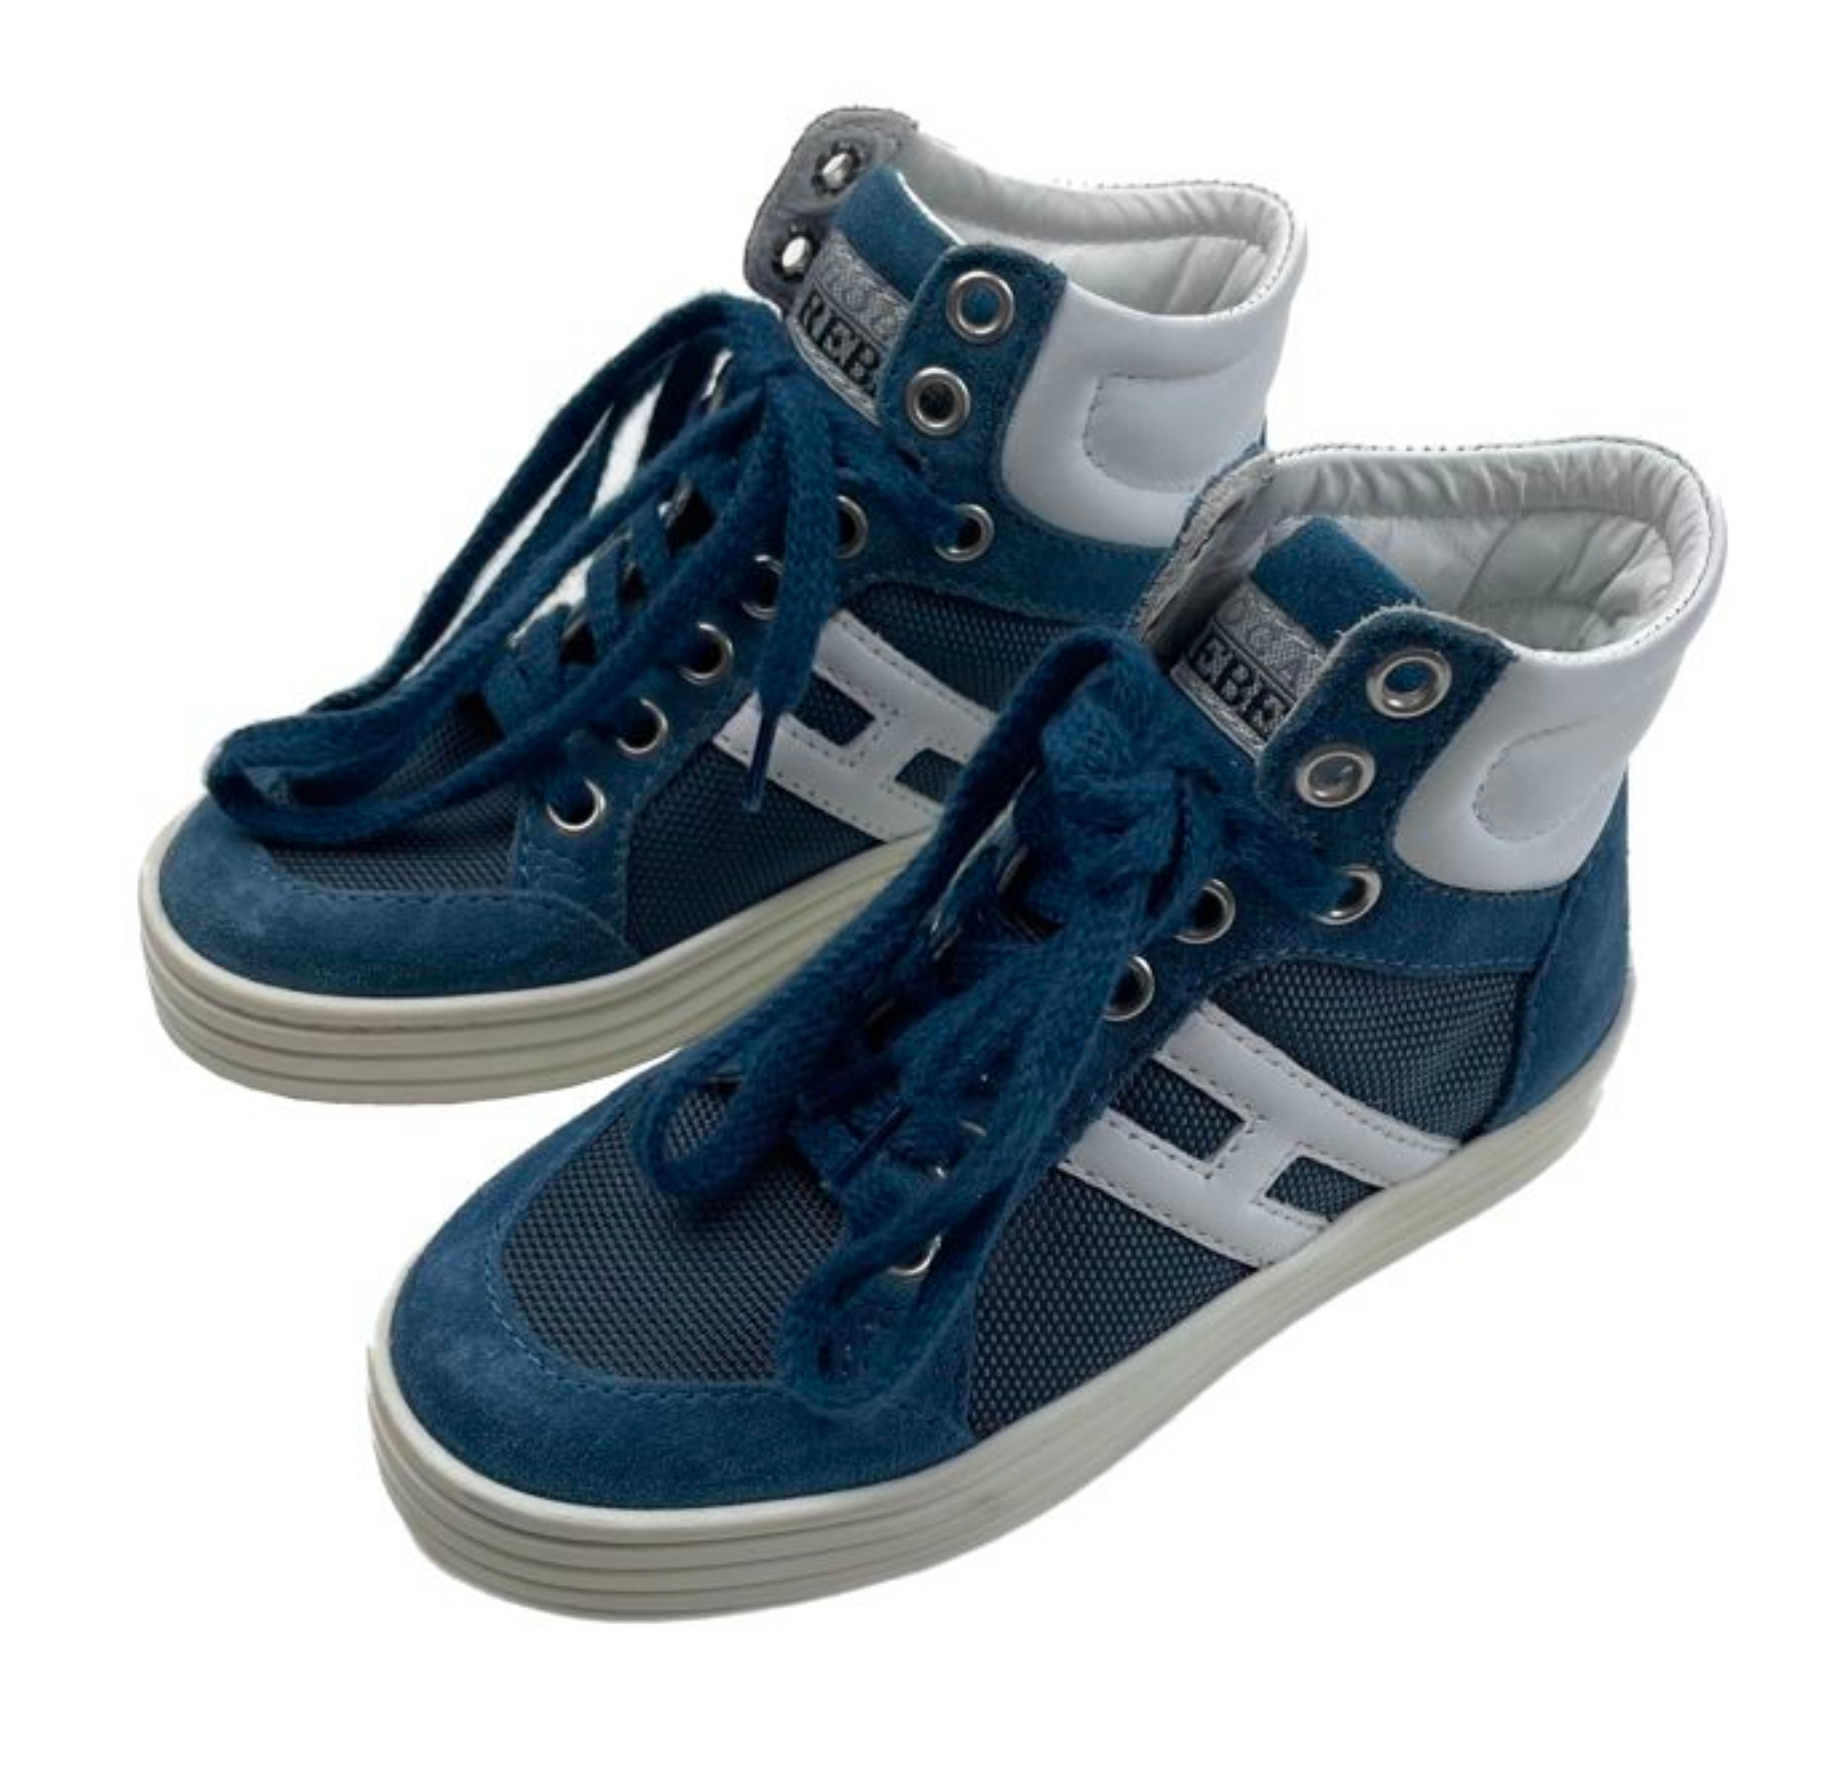 HOGAN - Blue &amp; white high-top sneakers - Size 28